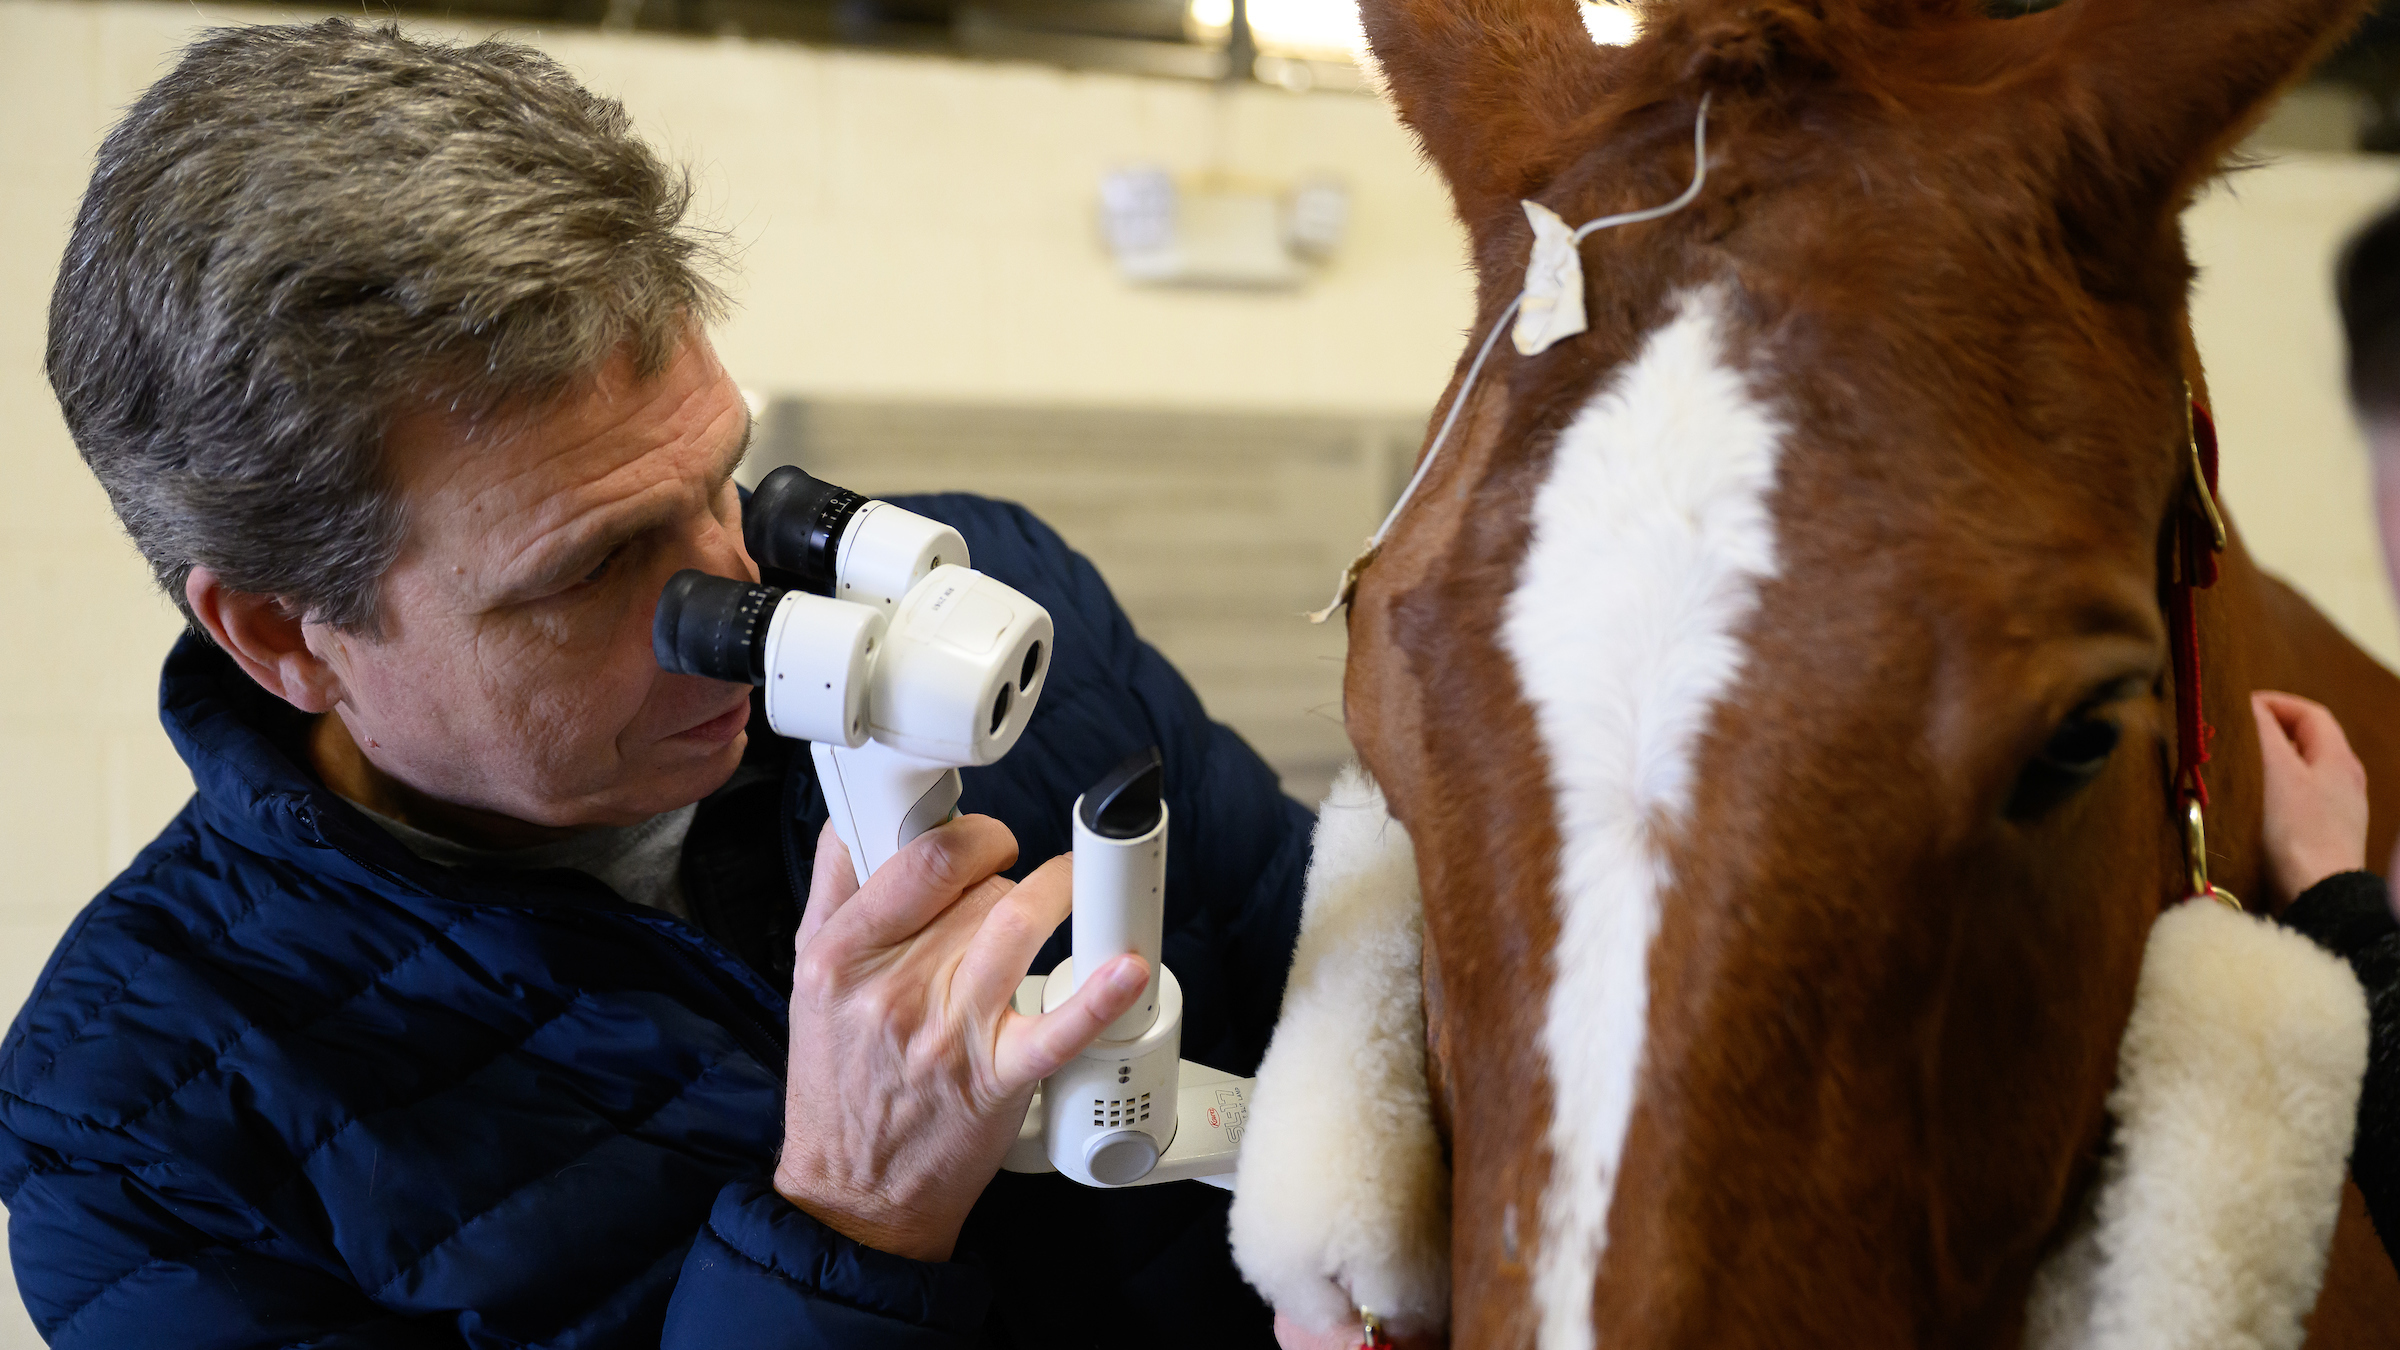 An ophthalmologist examines a horse's eye.